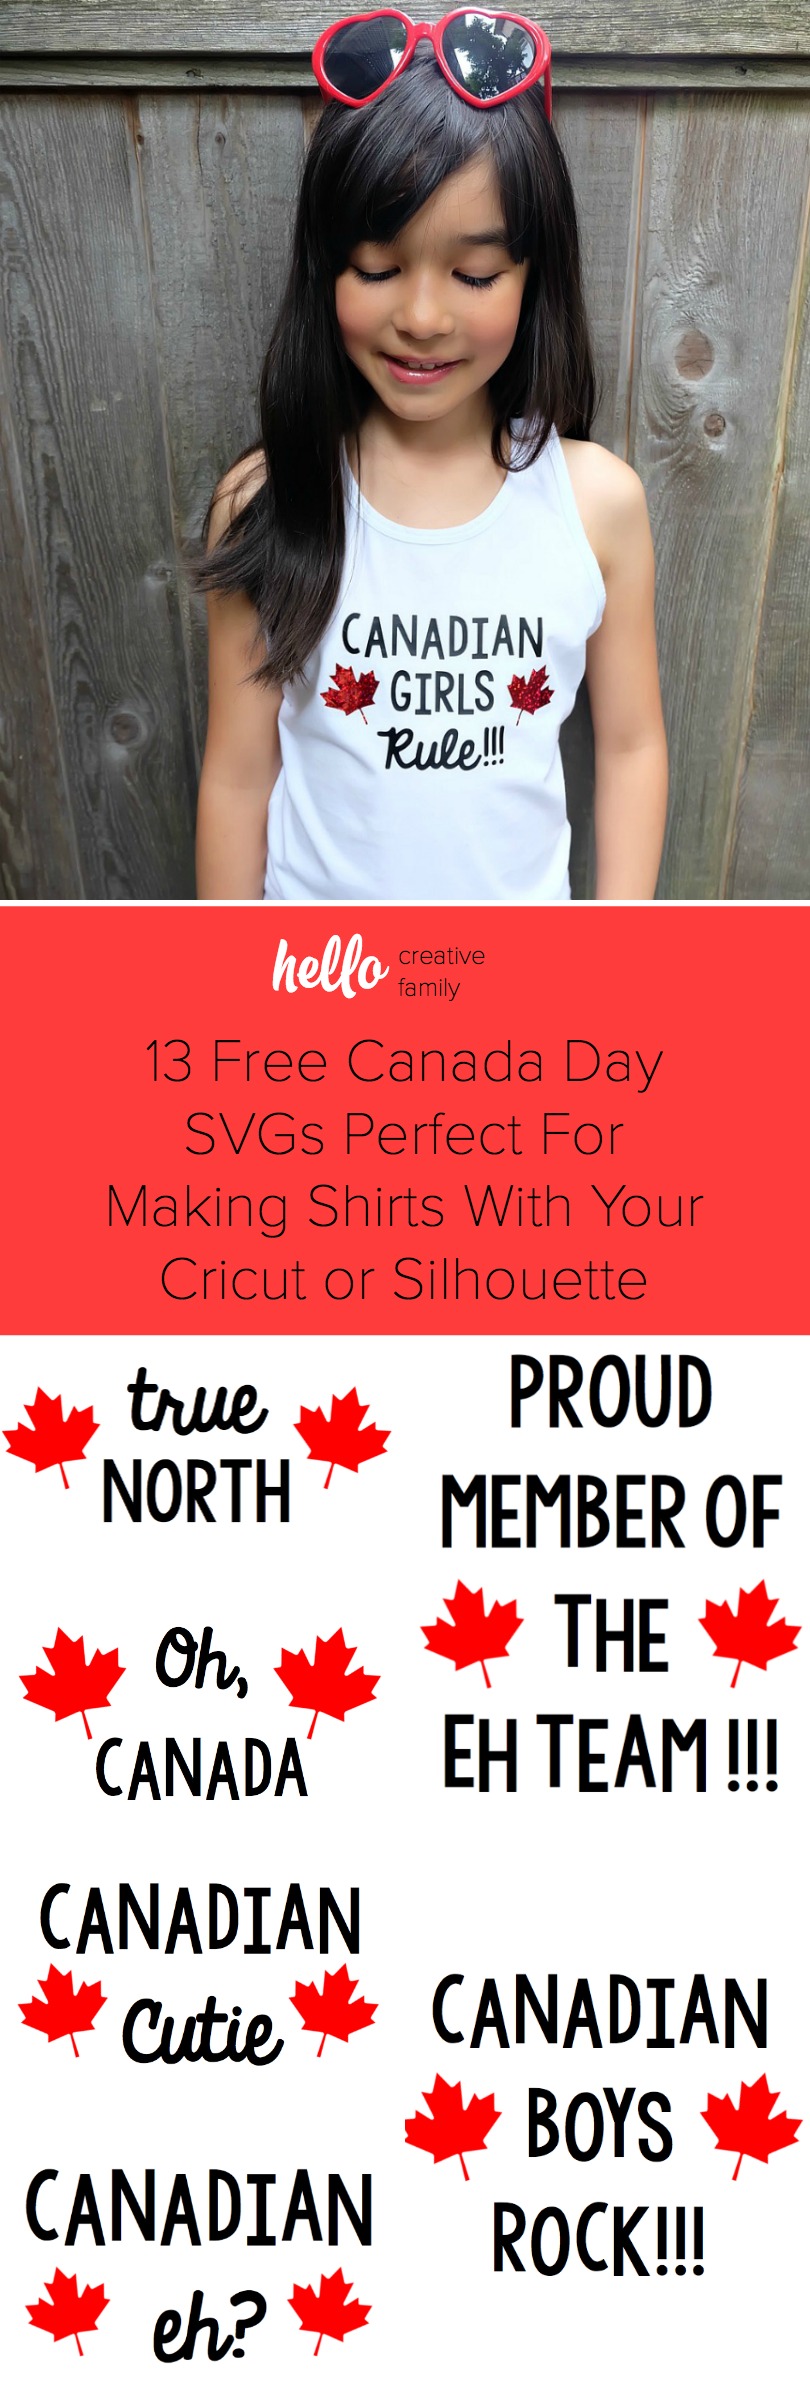 Oh Canada! Get ready for Canada Day with 13 Free Canada Day SVG Files! DIY custom shirts for your family and friends and get ready to celebrate! Perfect for customizing everything for your Canada Day Party using either your Cricut or Silhouette. Get crafting! #CanadaDay #canada #cricut #silhouette